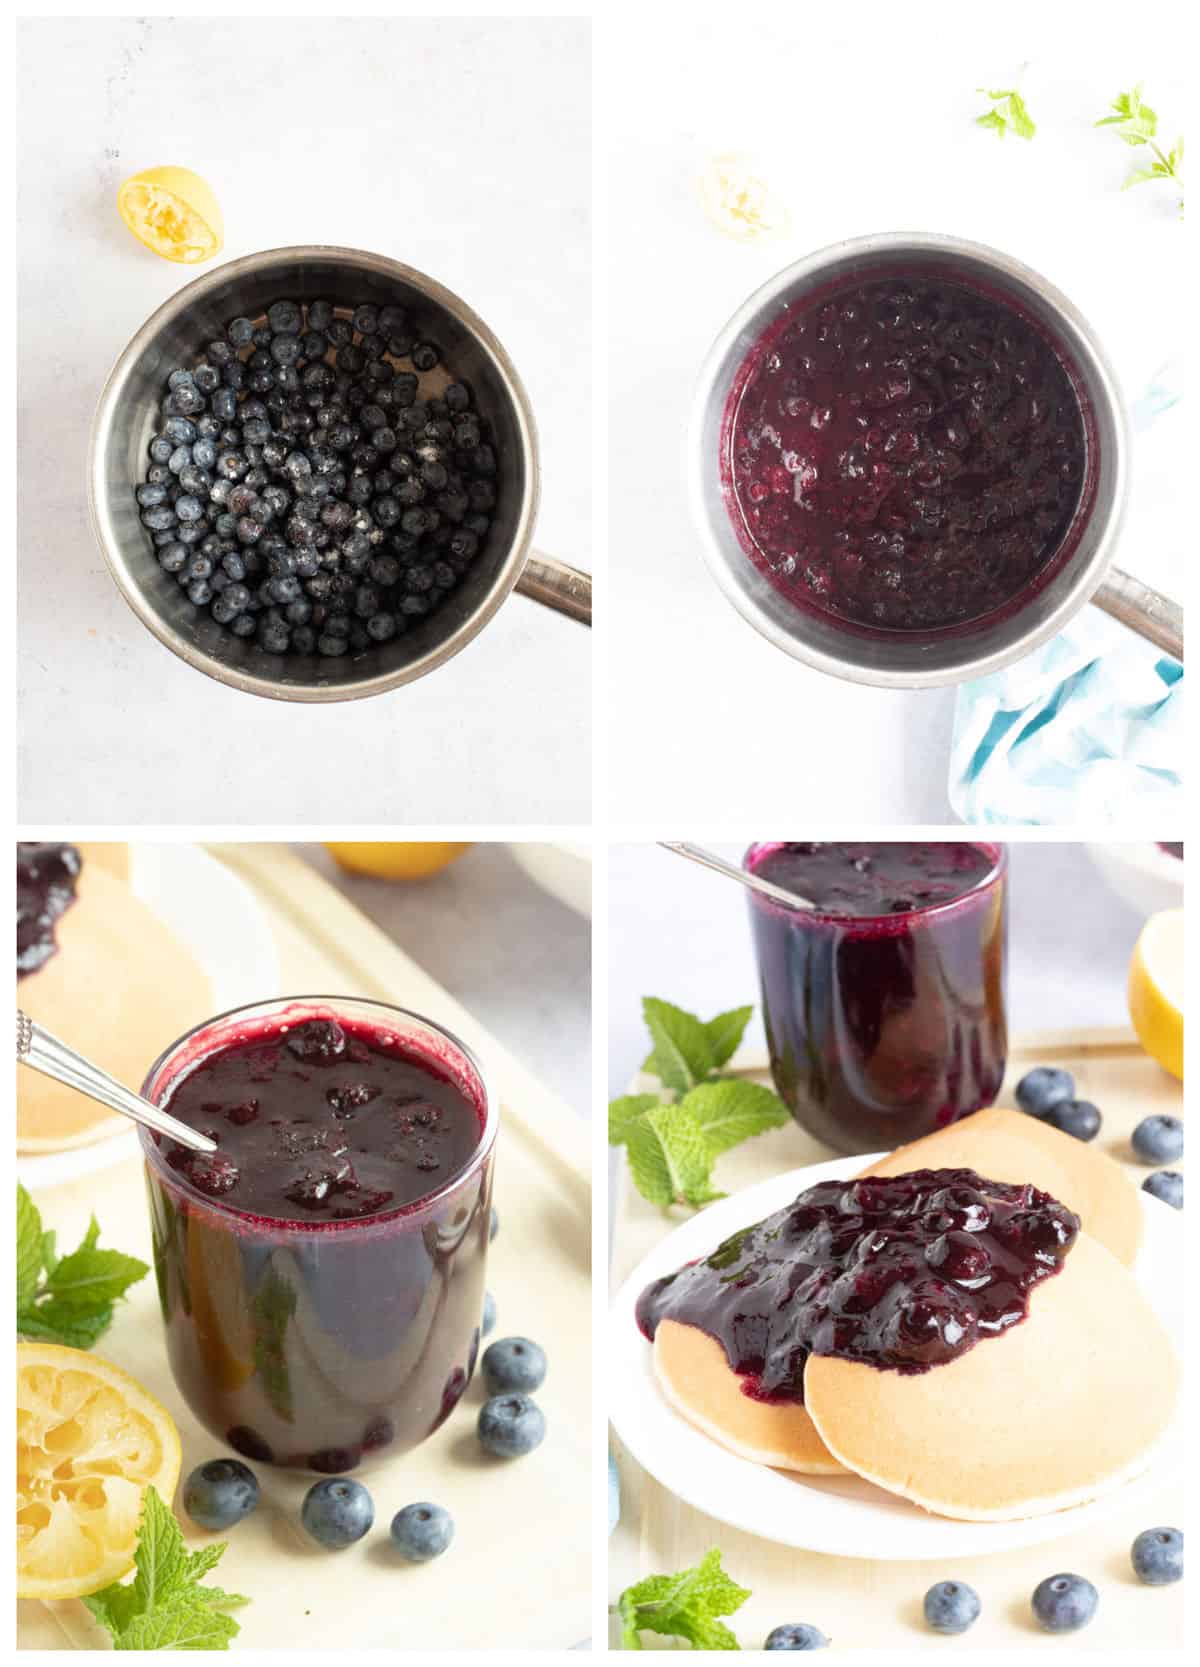 Step by step photo instructions for making the blueberry compote.